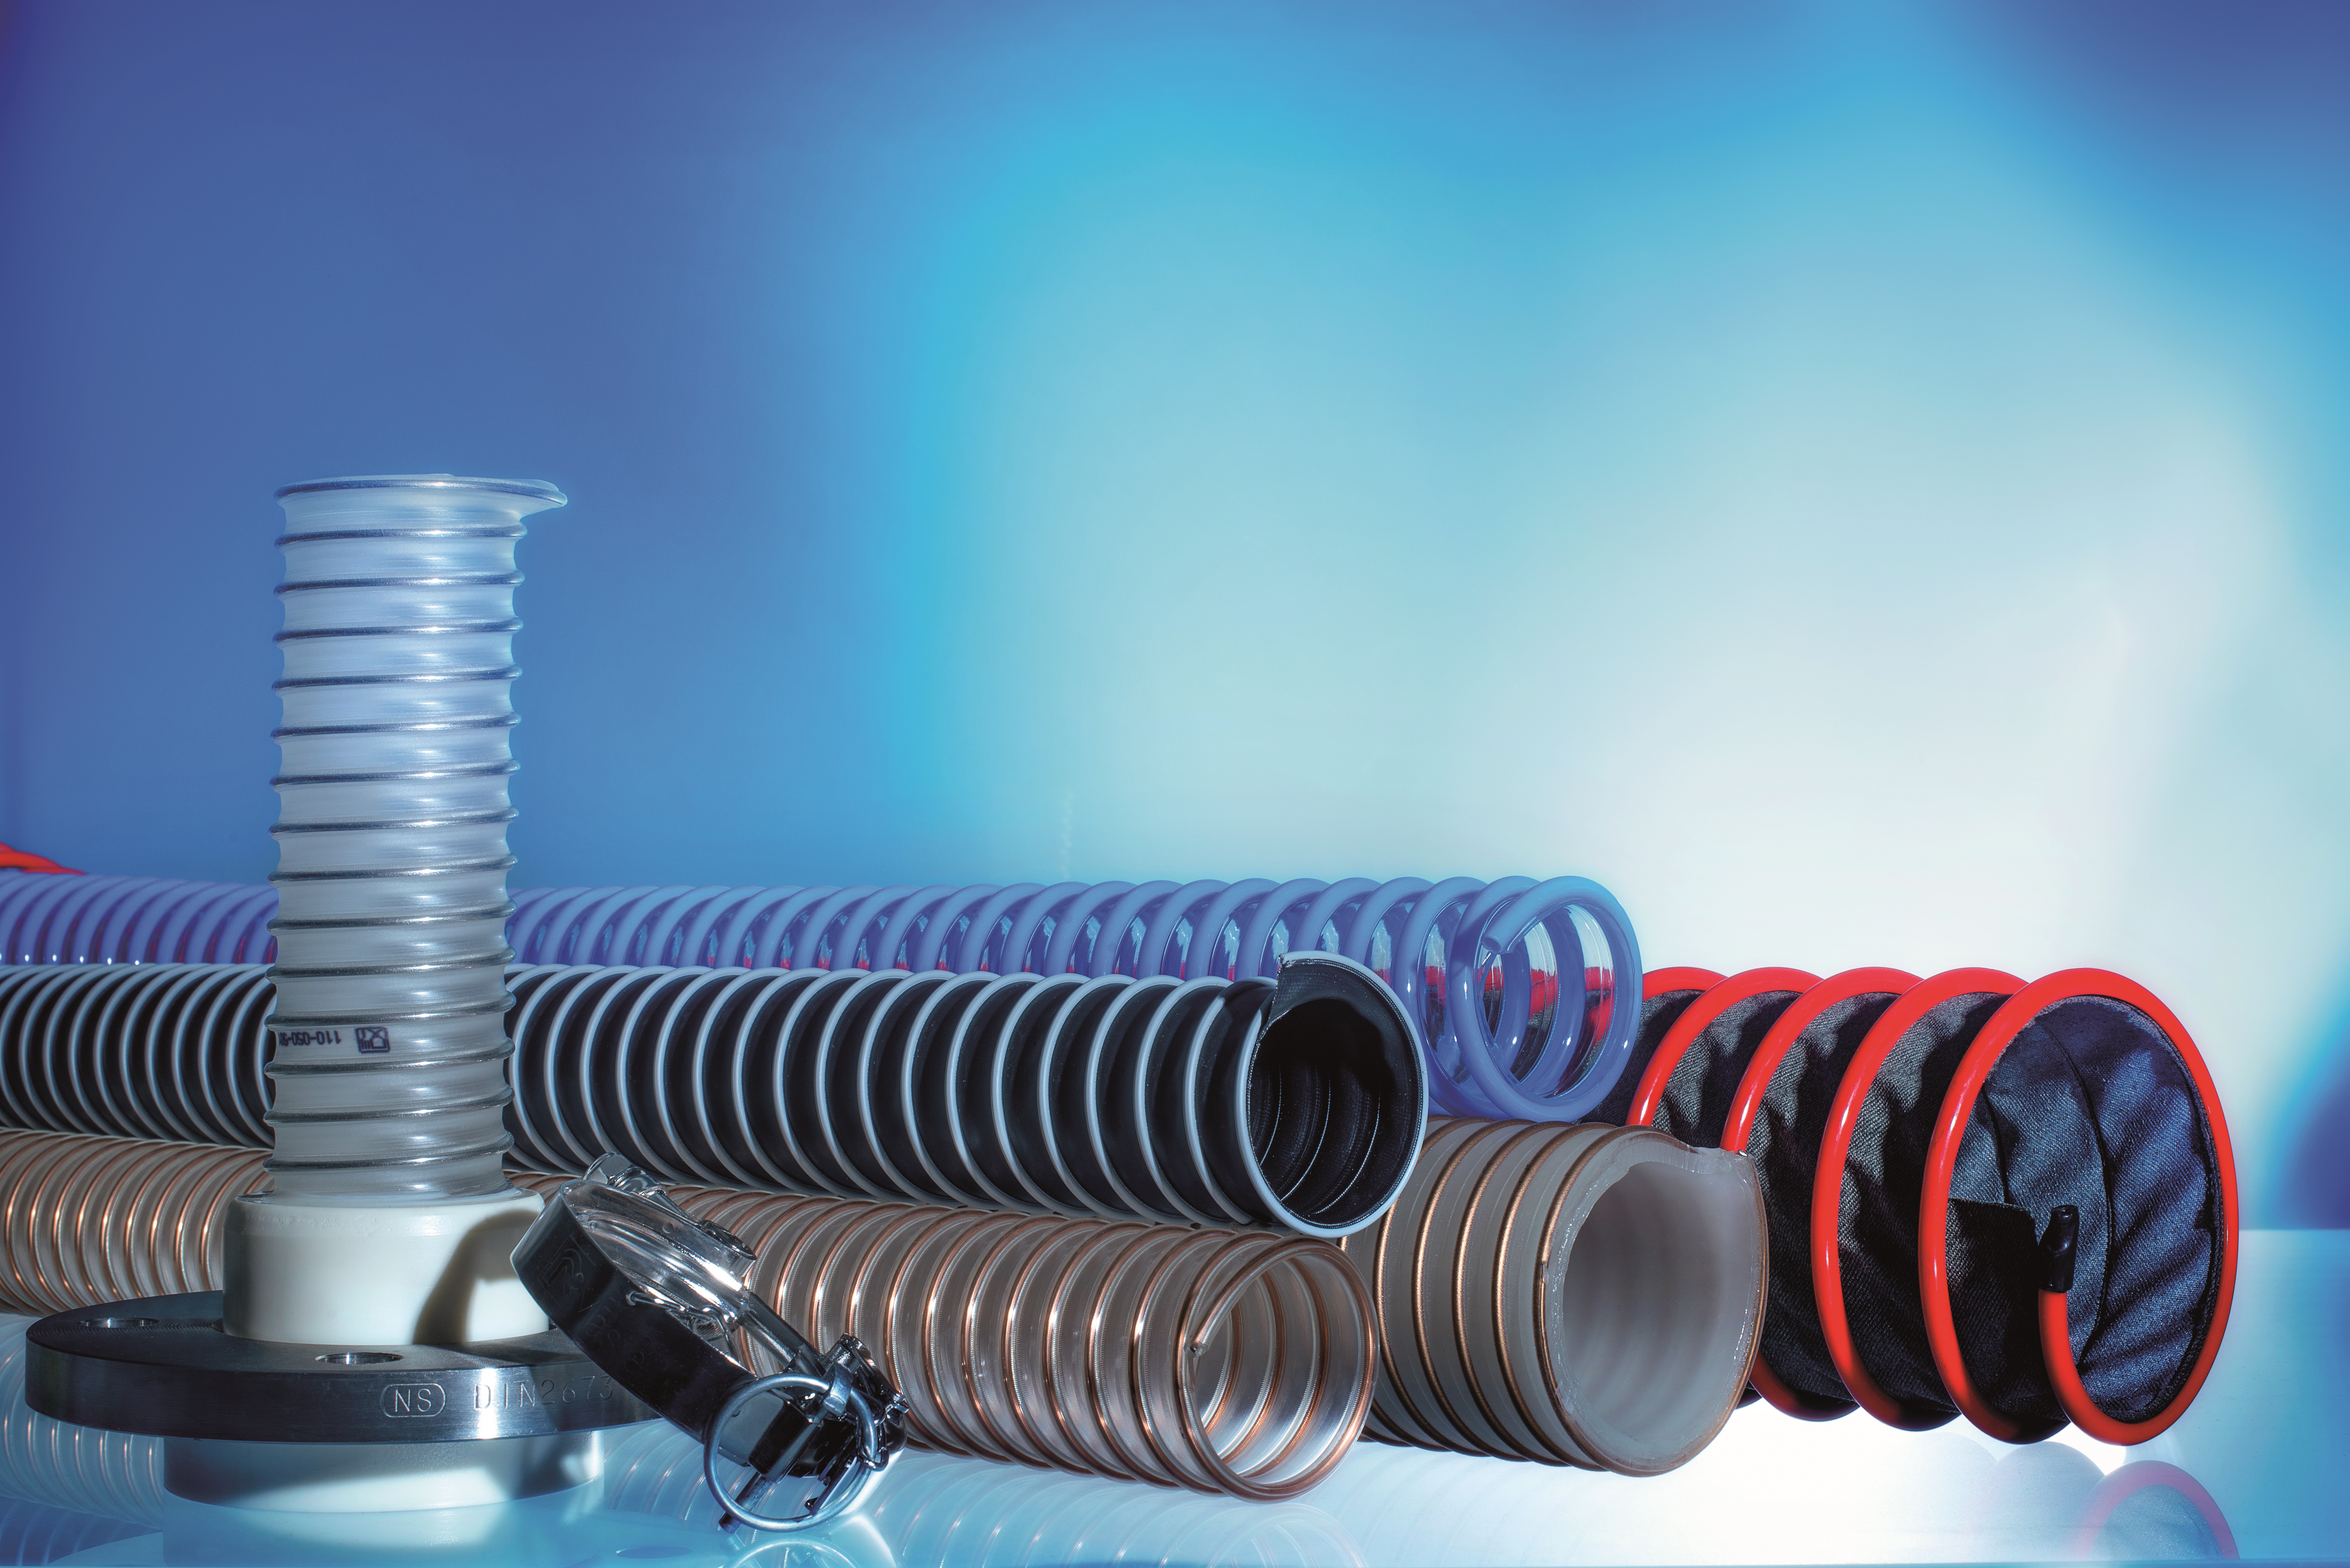 Types of hoses for various hose applications